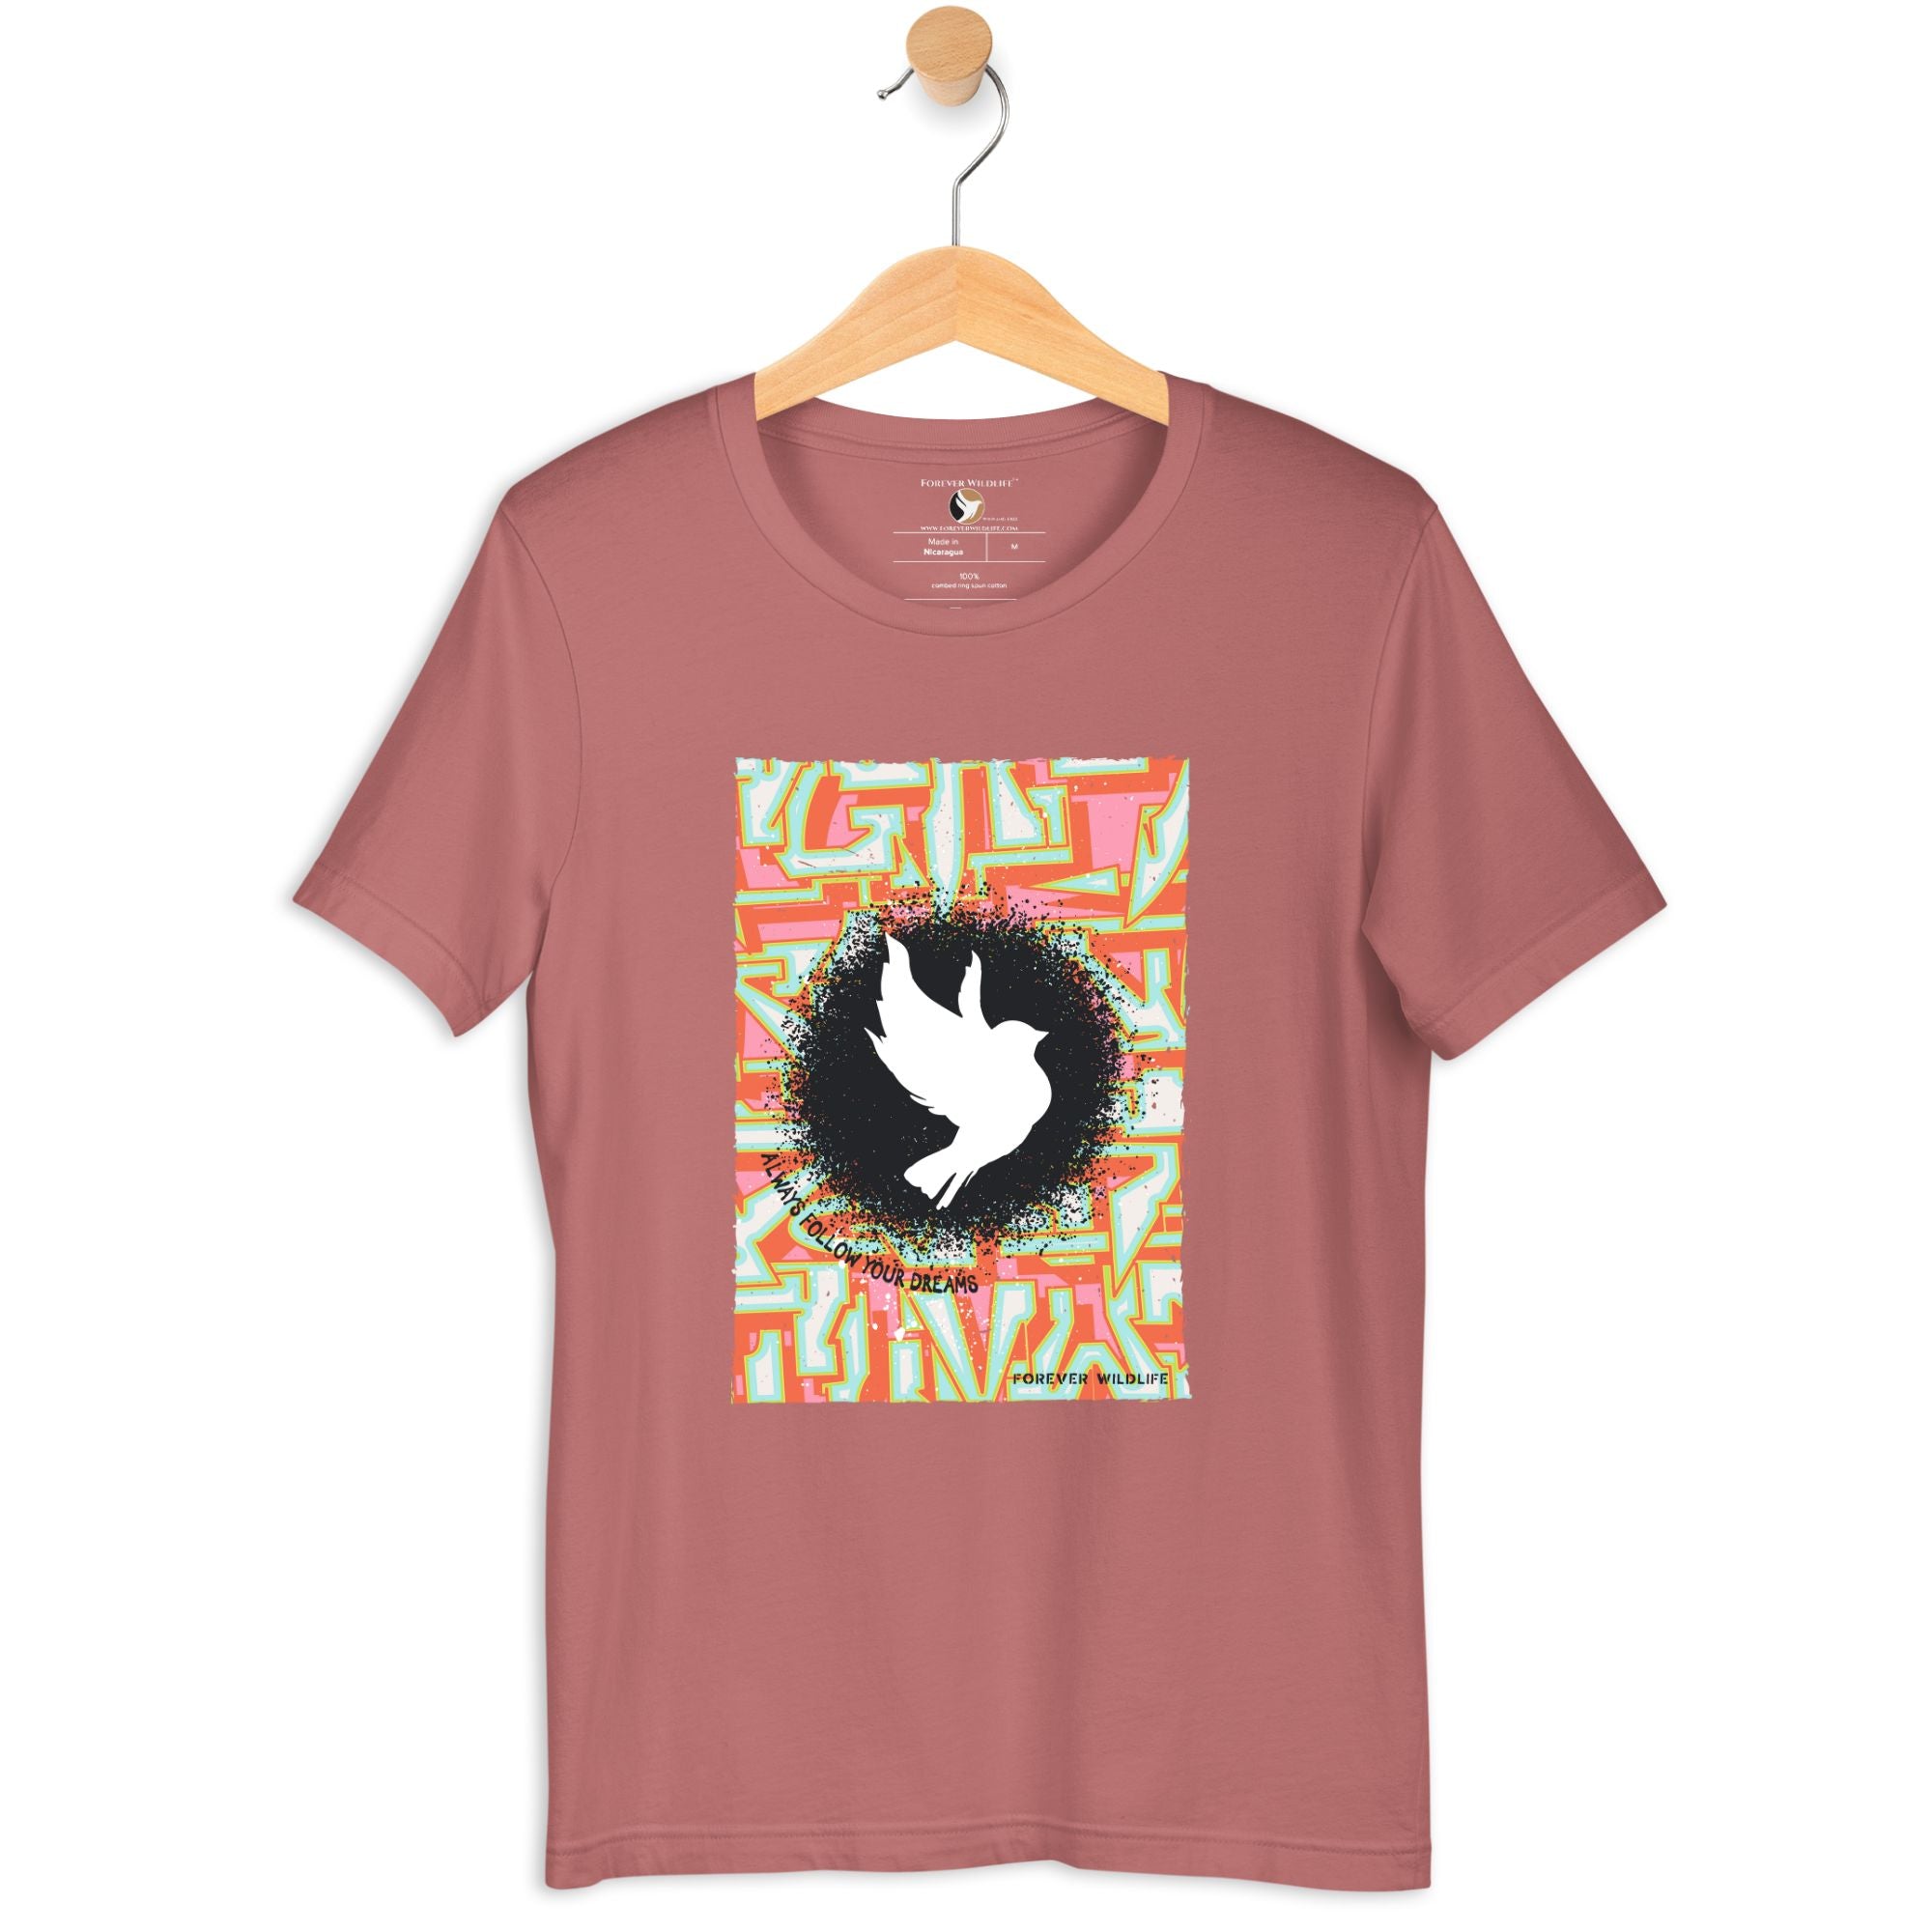 Dove Shirt in Mauve - High-Quality Wildlife Inspirational T-Shirt Design, Wildlife Clothing from Forever Wildlife